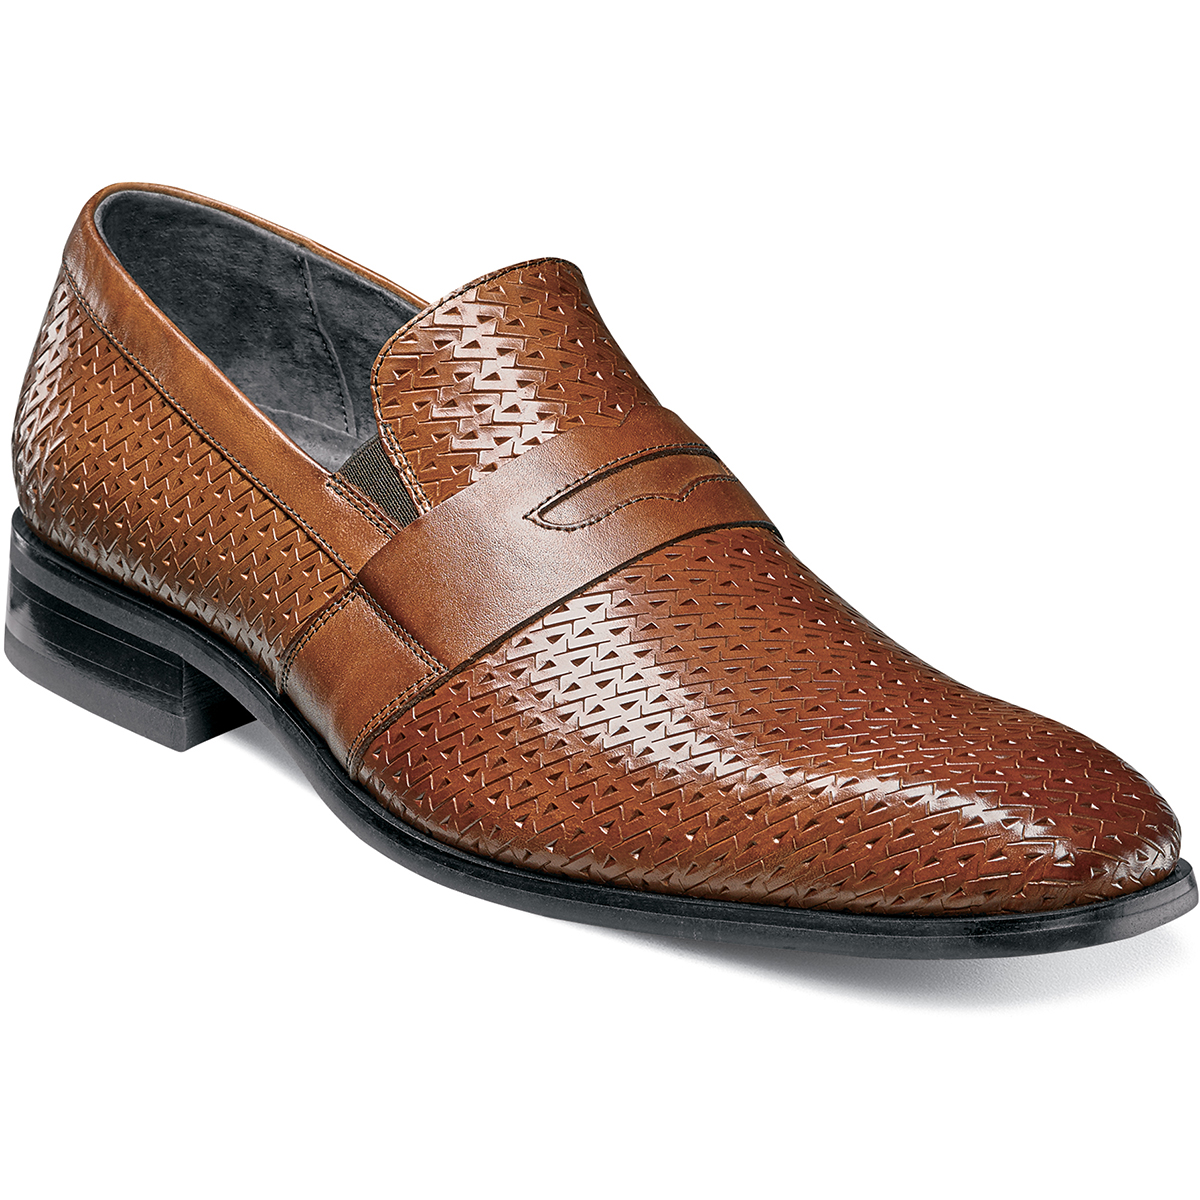 Clearance Shoes | Cognac Plain Toe Penny Loafer | Stacy Adams Marcellus